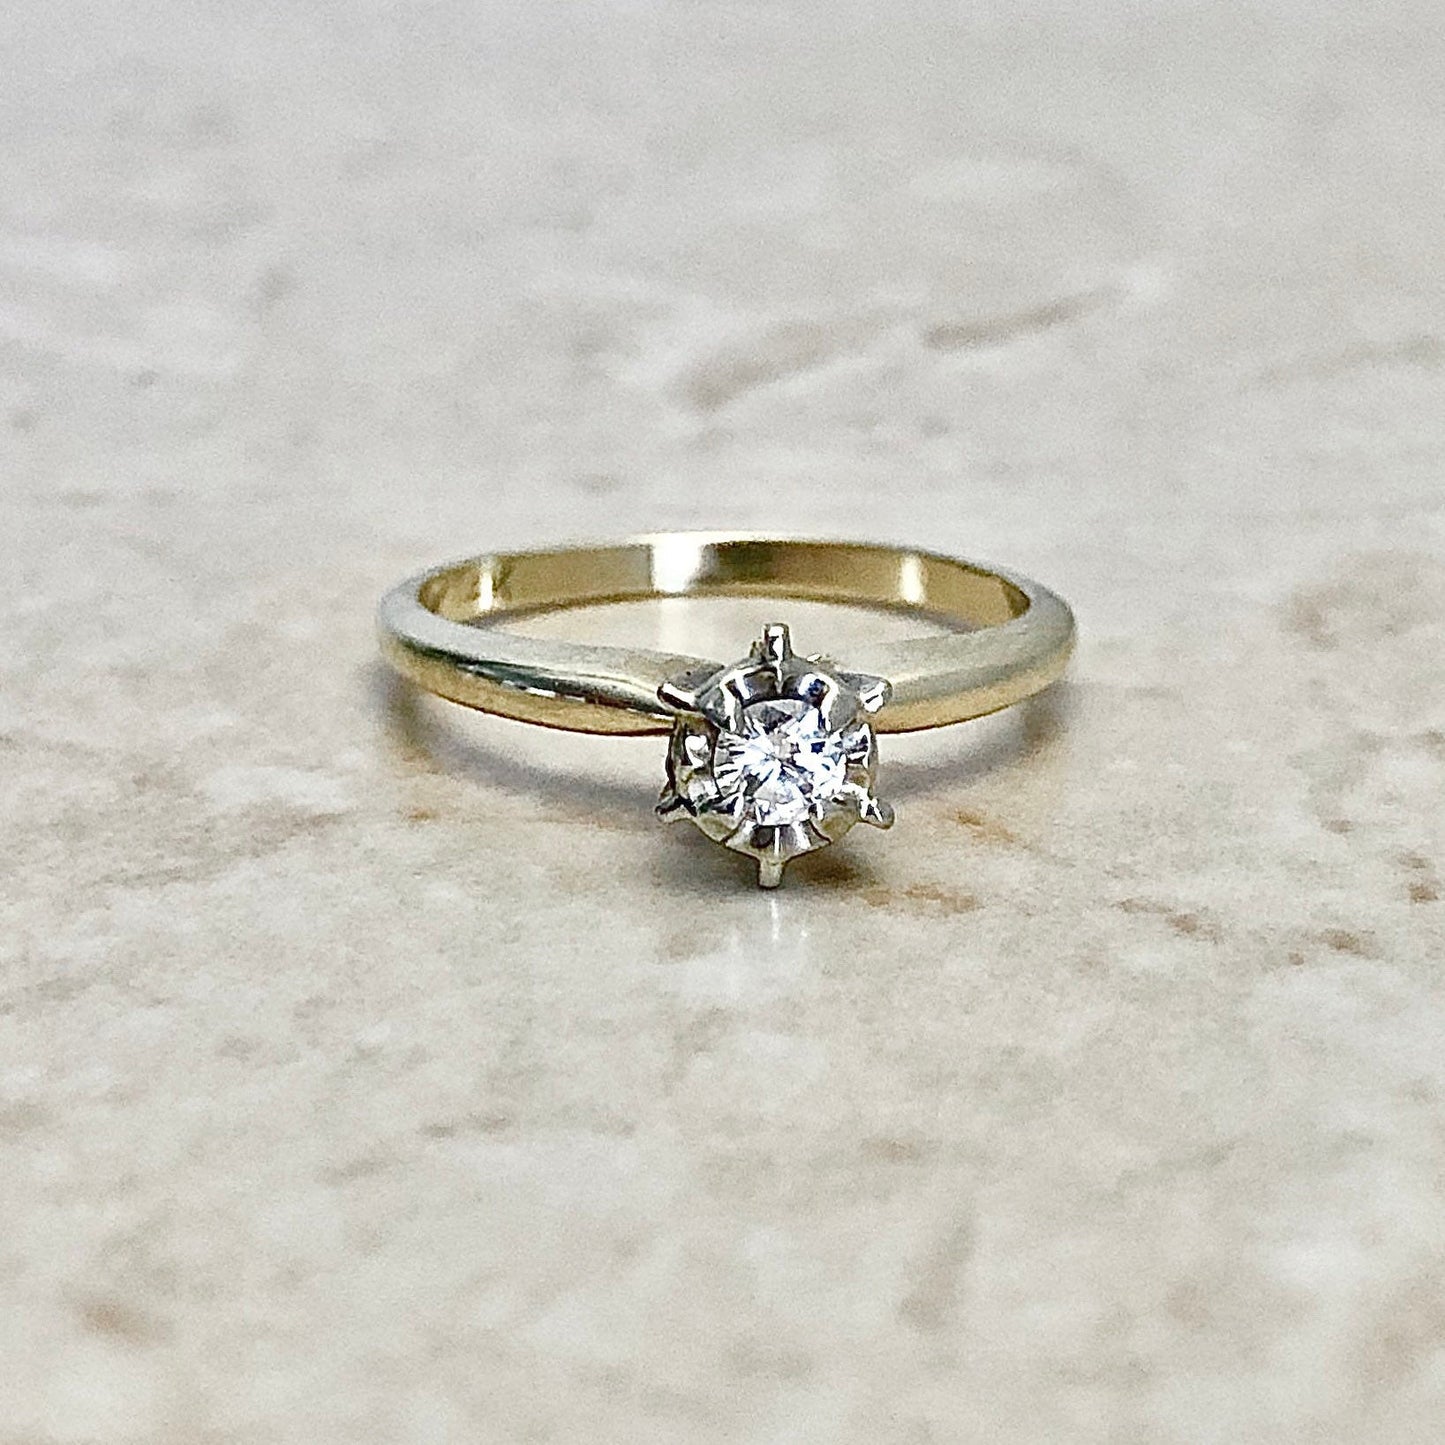 Vintage 14K Diamond Solitaire Ring - Yellow & White Gold Diamond Engagement Ring - April Birthstone - Promise Ring - Bridal Ring